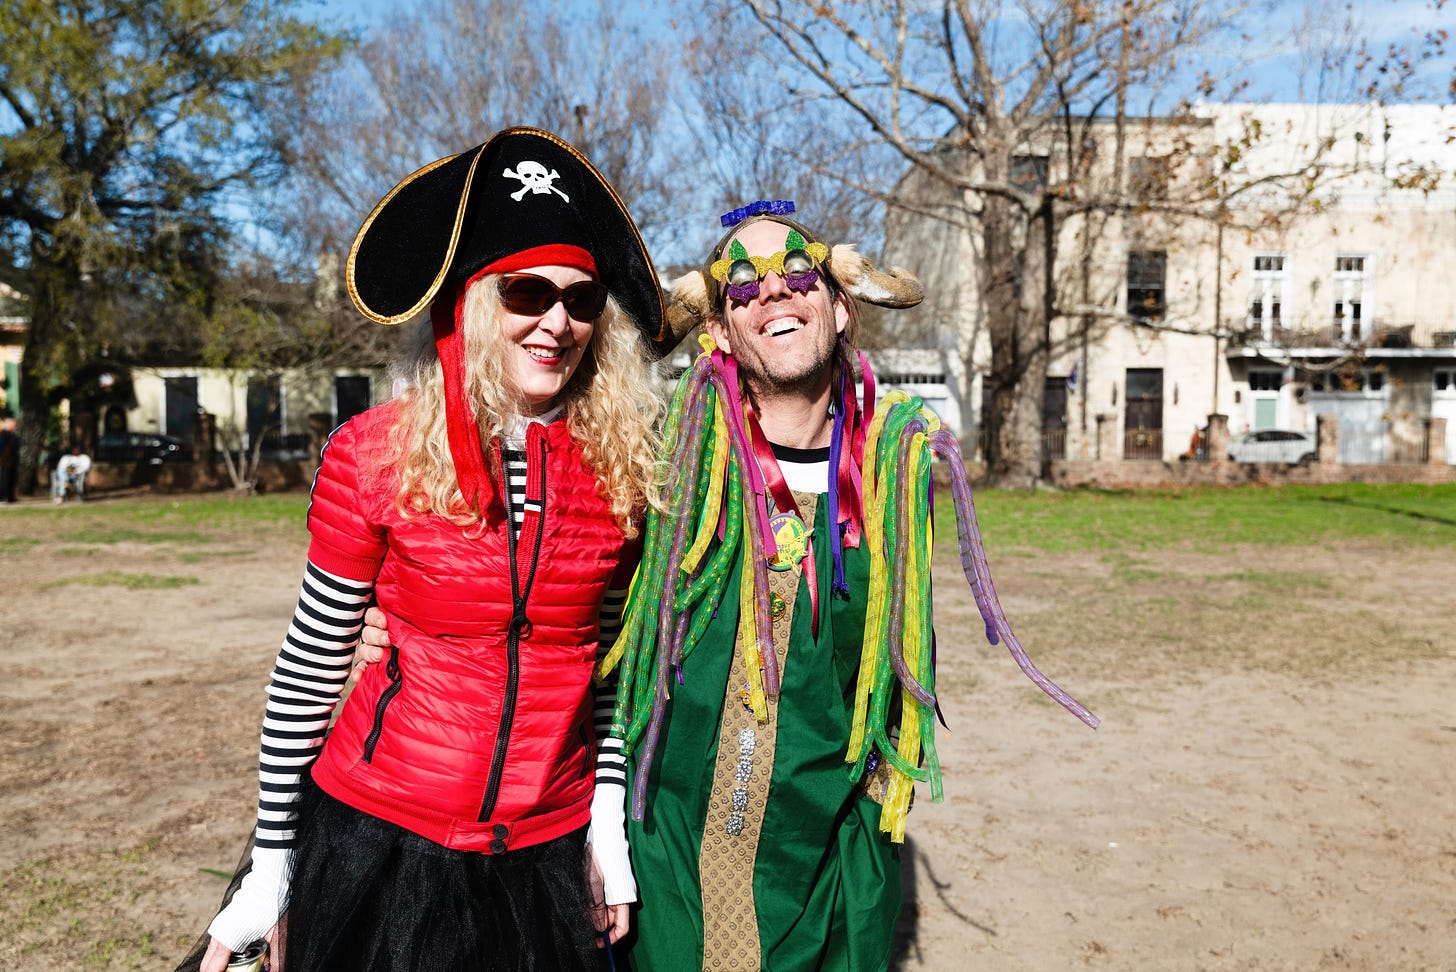 A woman wearing a pirate hat, striped shirt, and red vest, and a man dressed in a zany purple, green, and gold Mardi Gras costume, in a park.